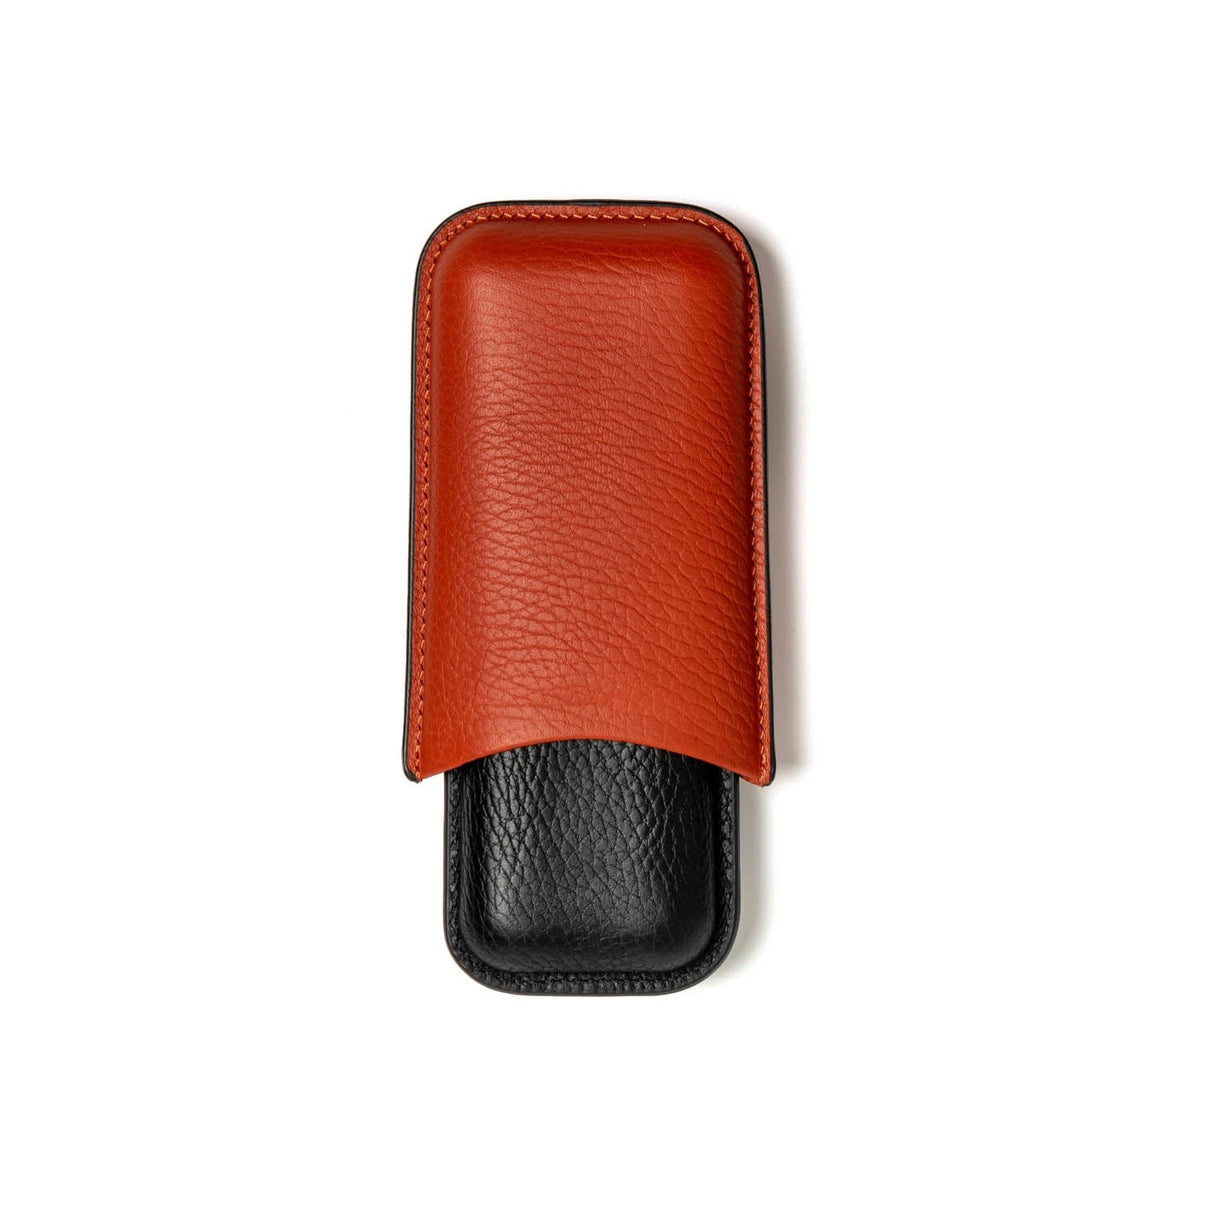    Holder for 2 Cigars.  Lined with our signature malachite lining.  100% Leather  Handcrafted 